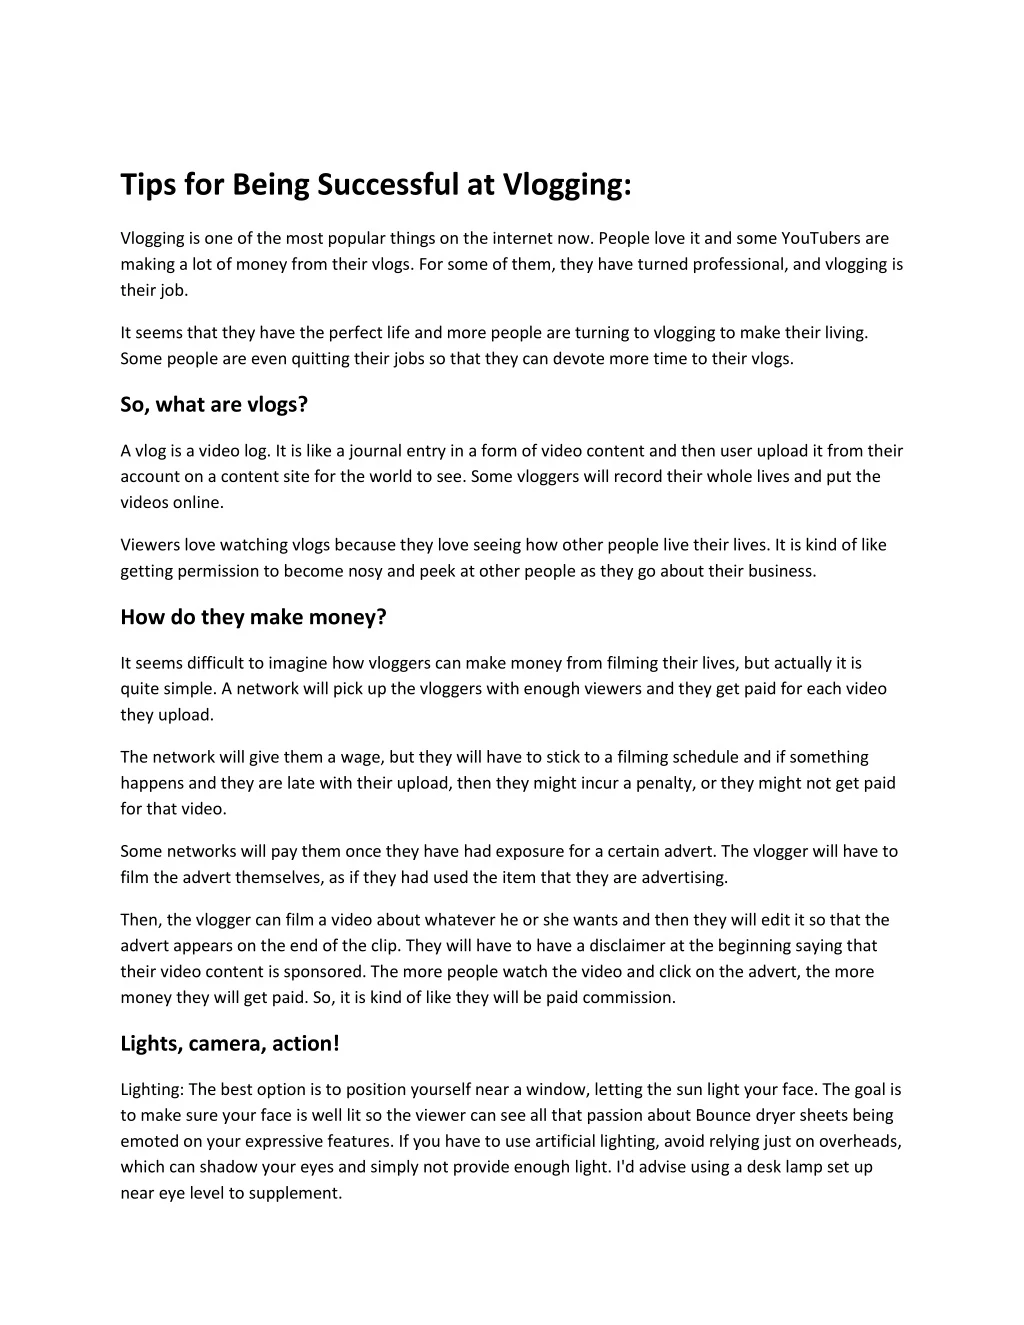 tips for being successful at vlogging